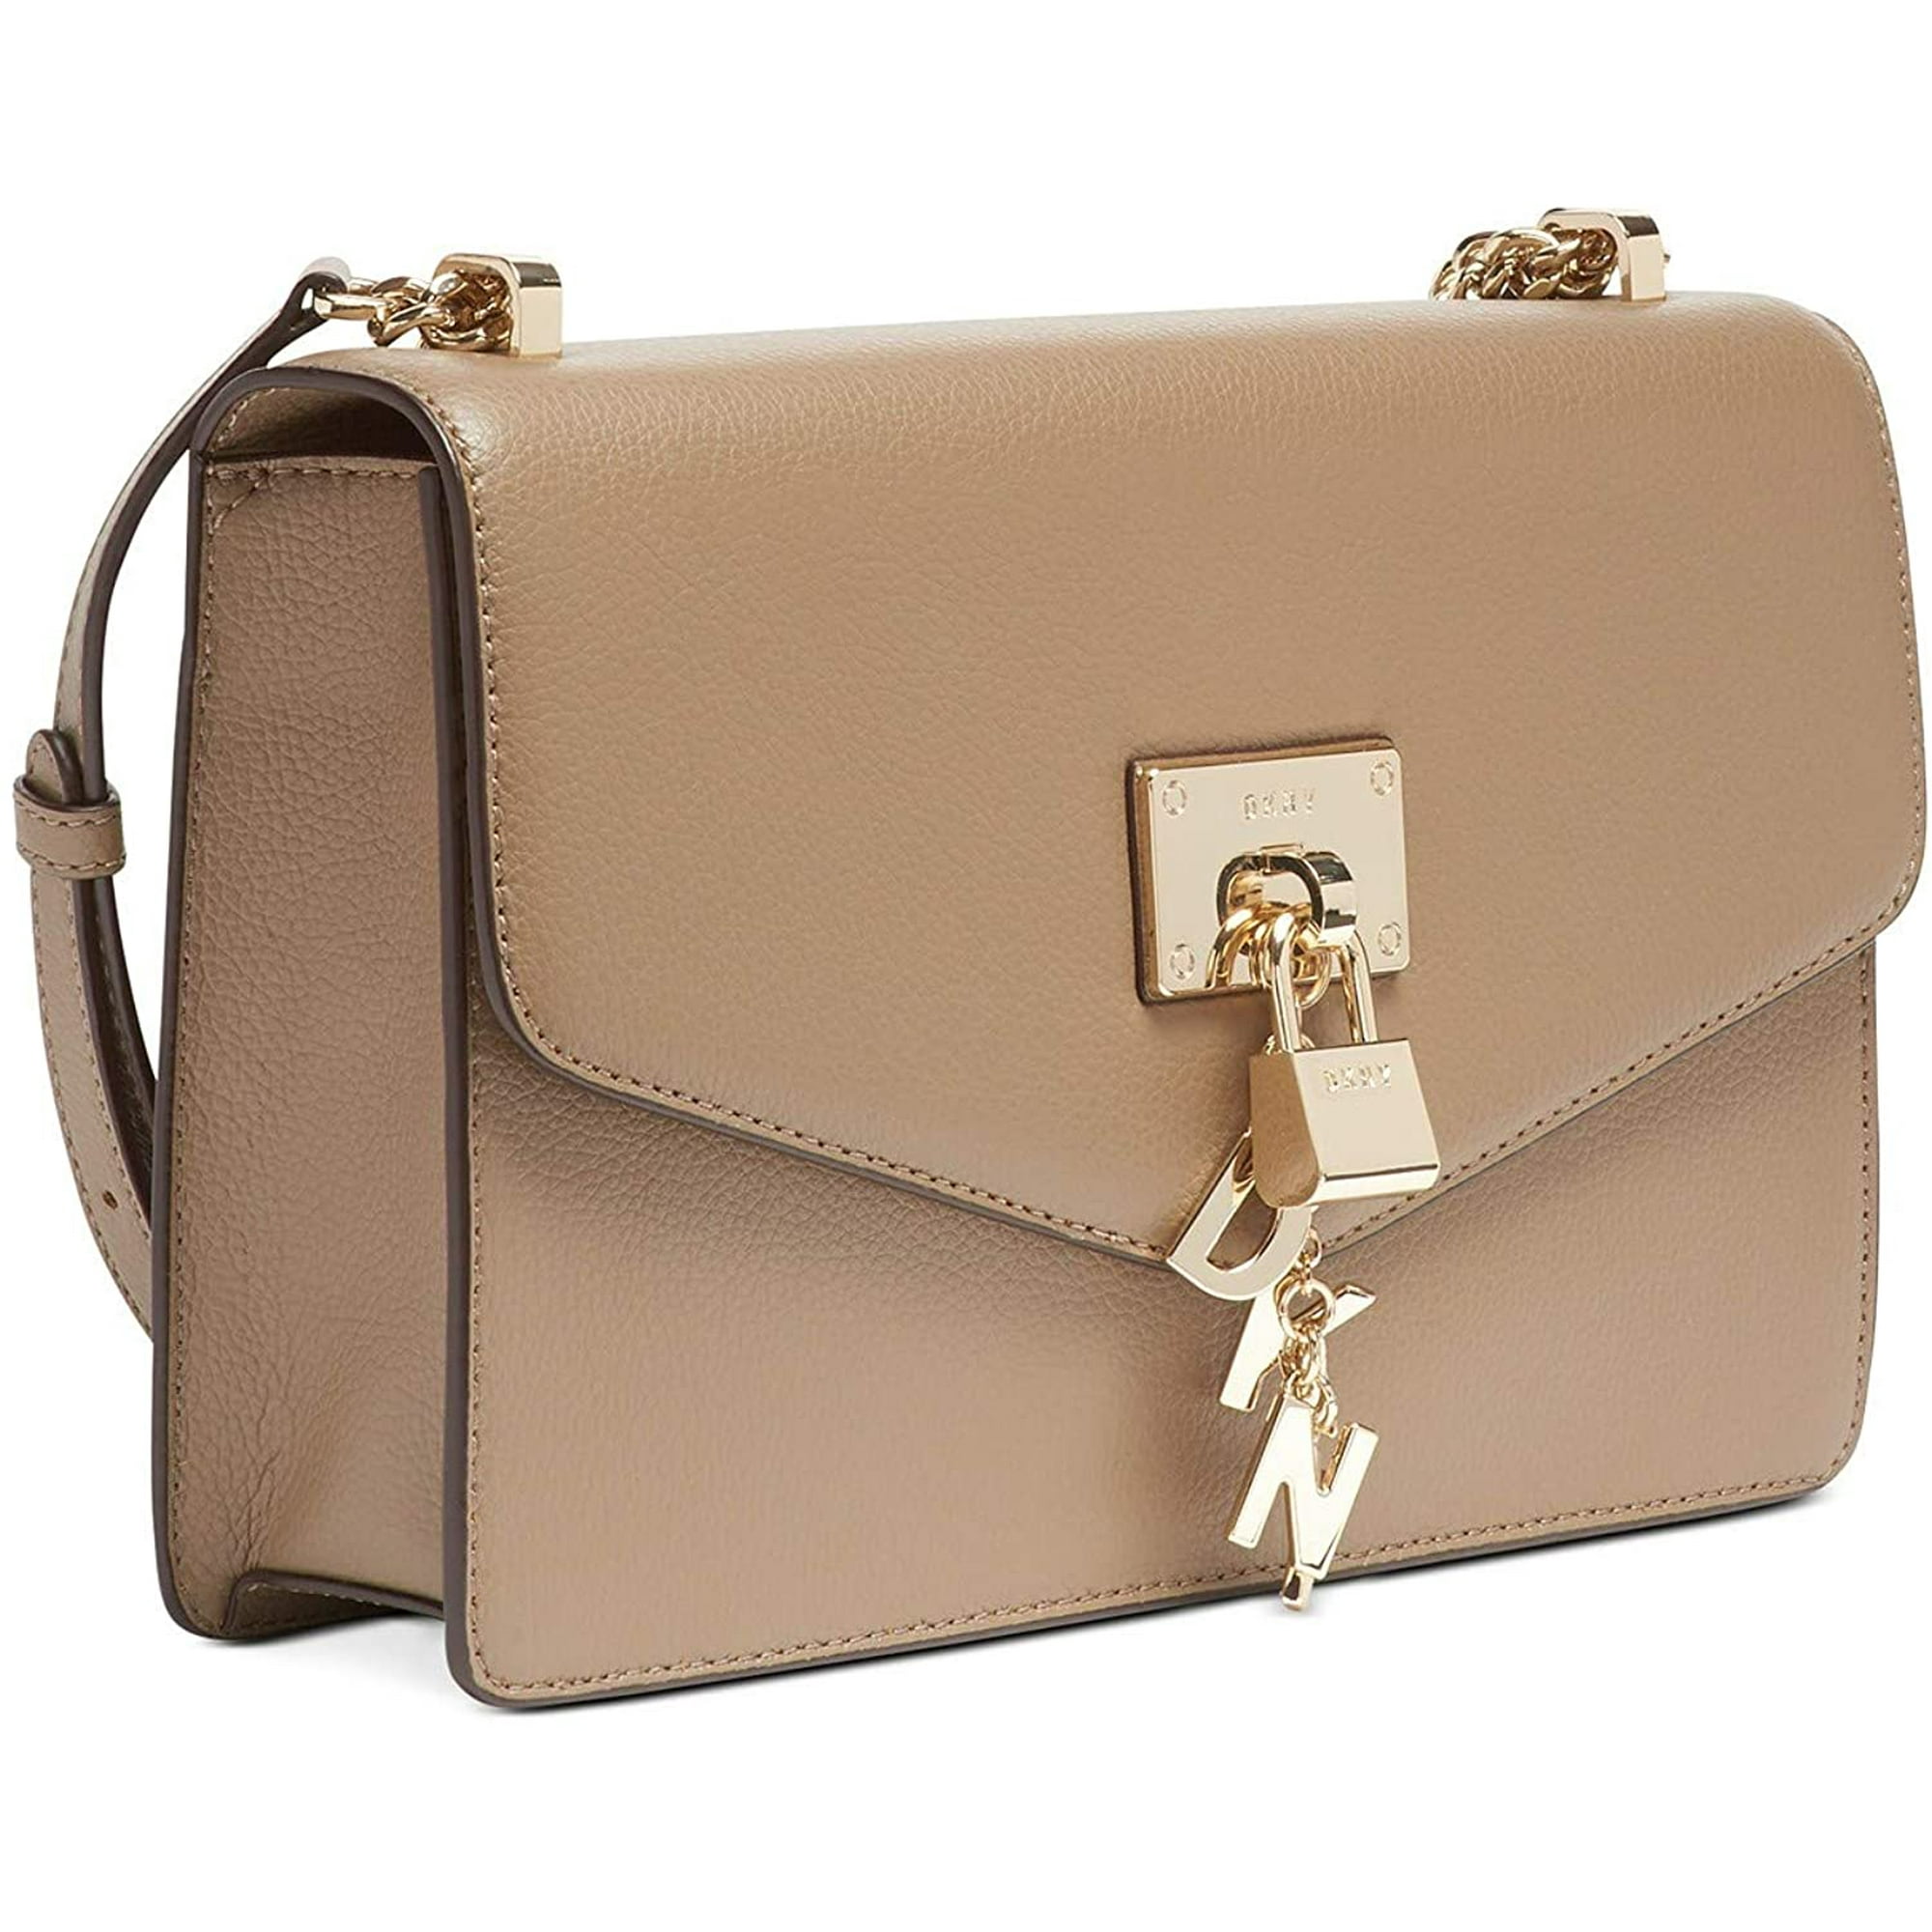 Bags from DKNY for Women in Brown